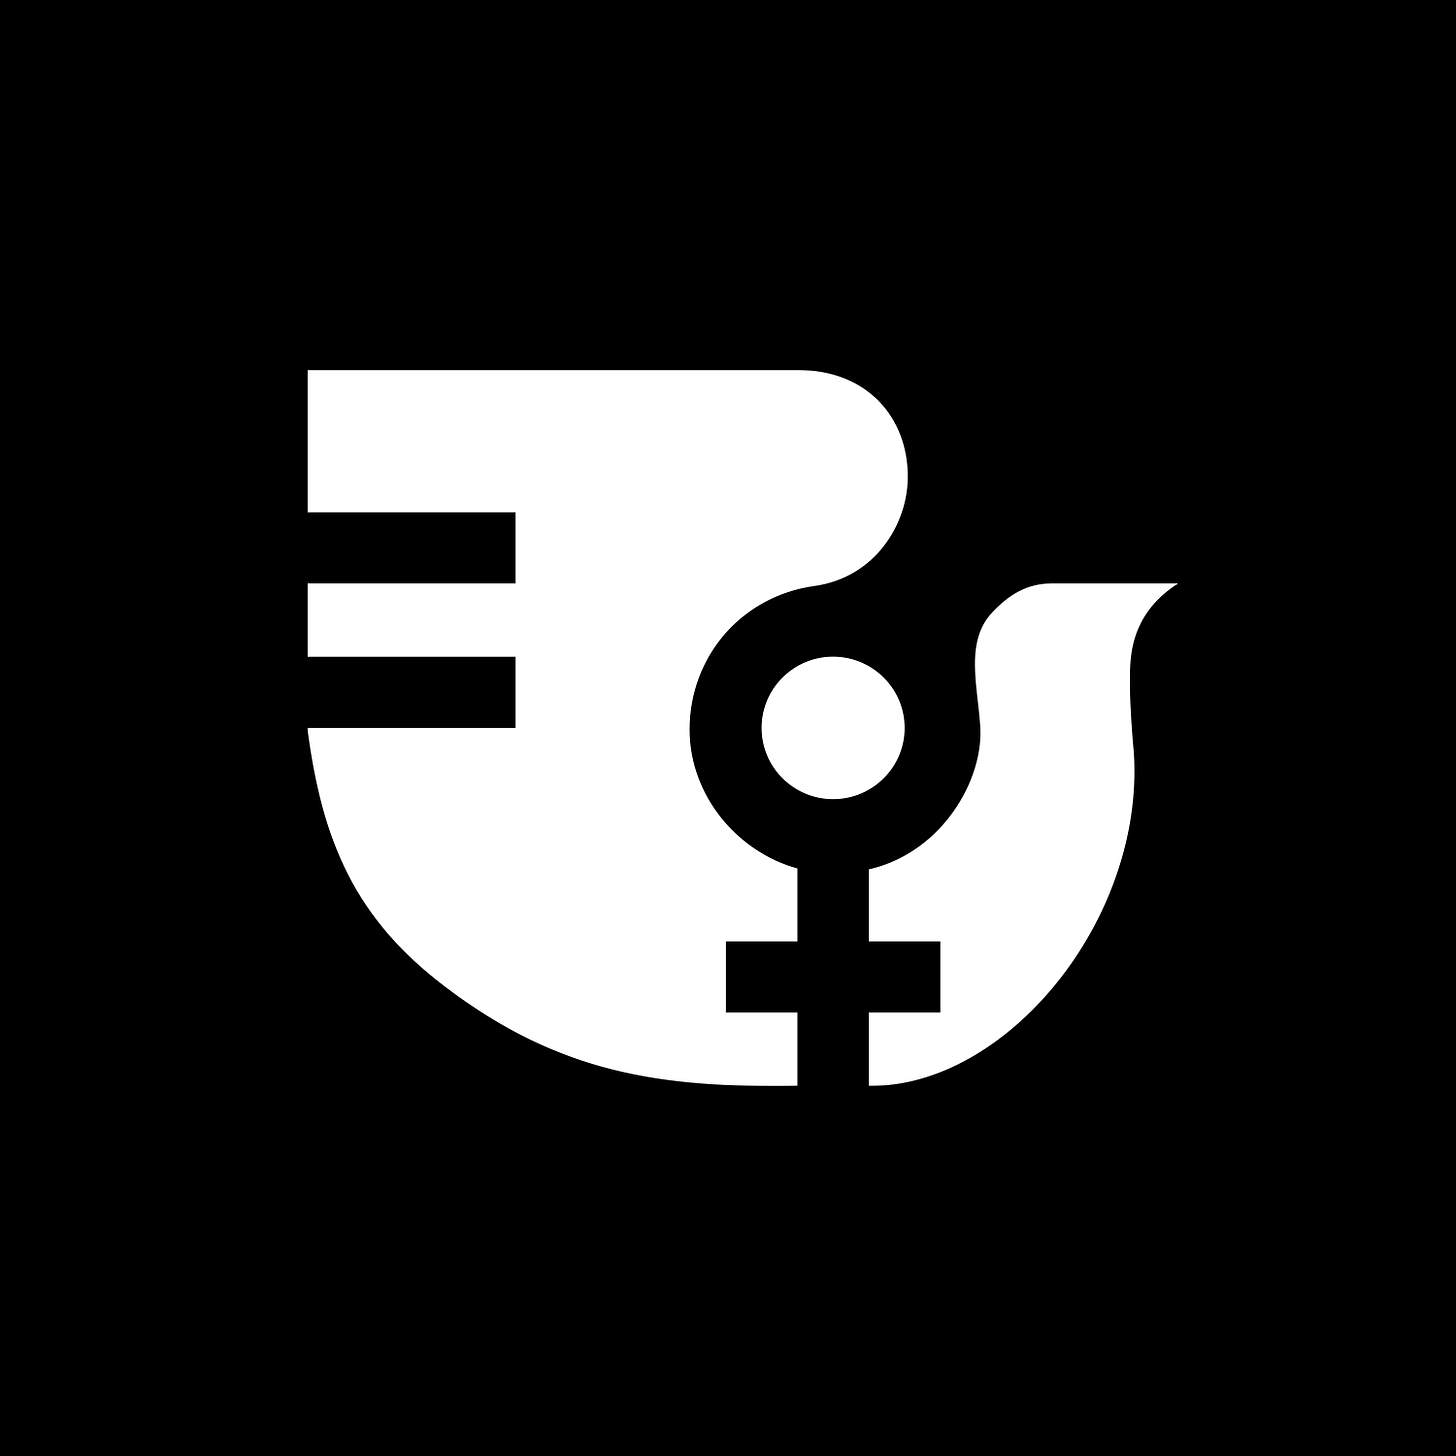 Valerie Pettis' 1975 logo for The United Nations Year of Women